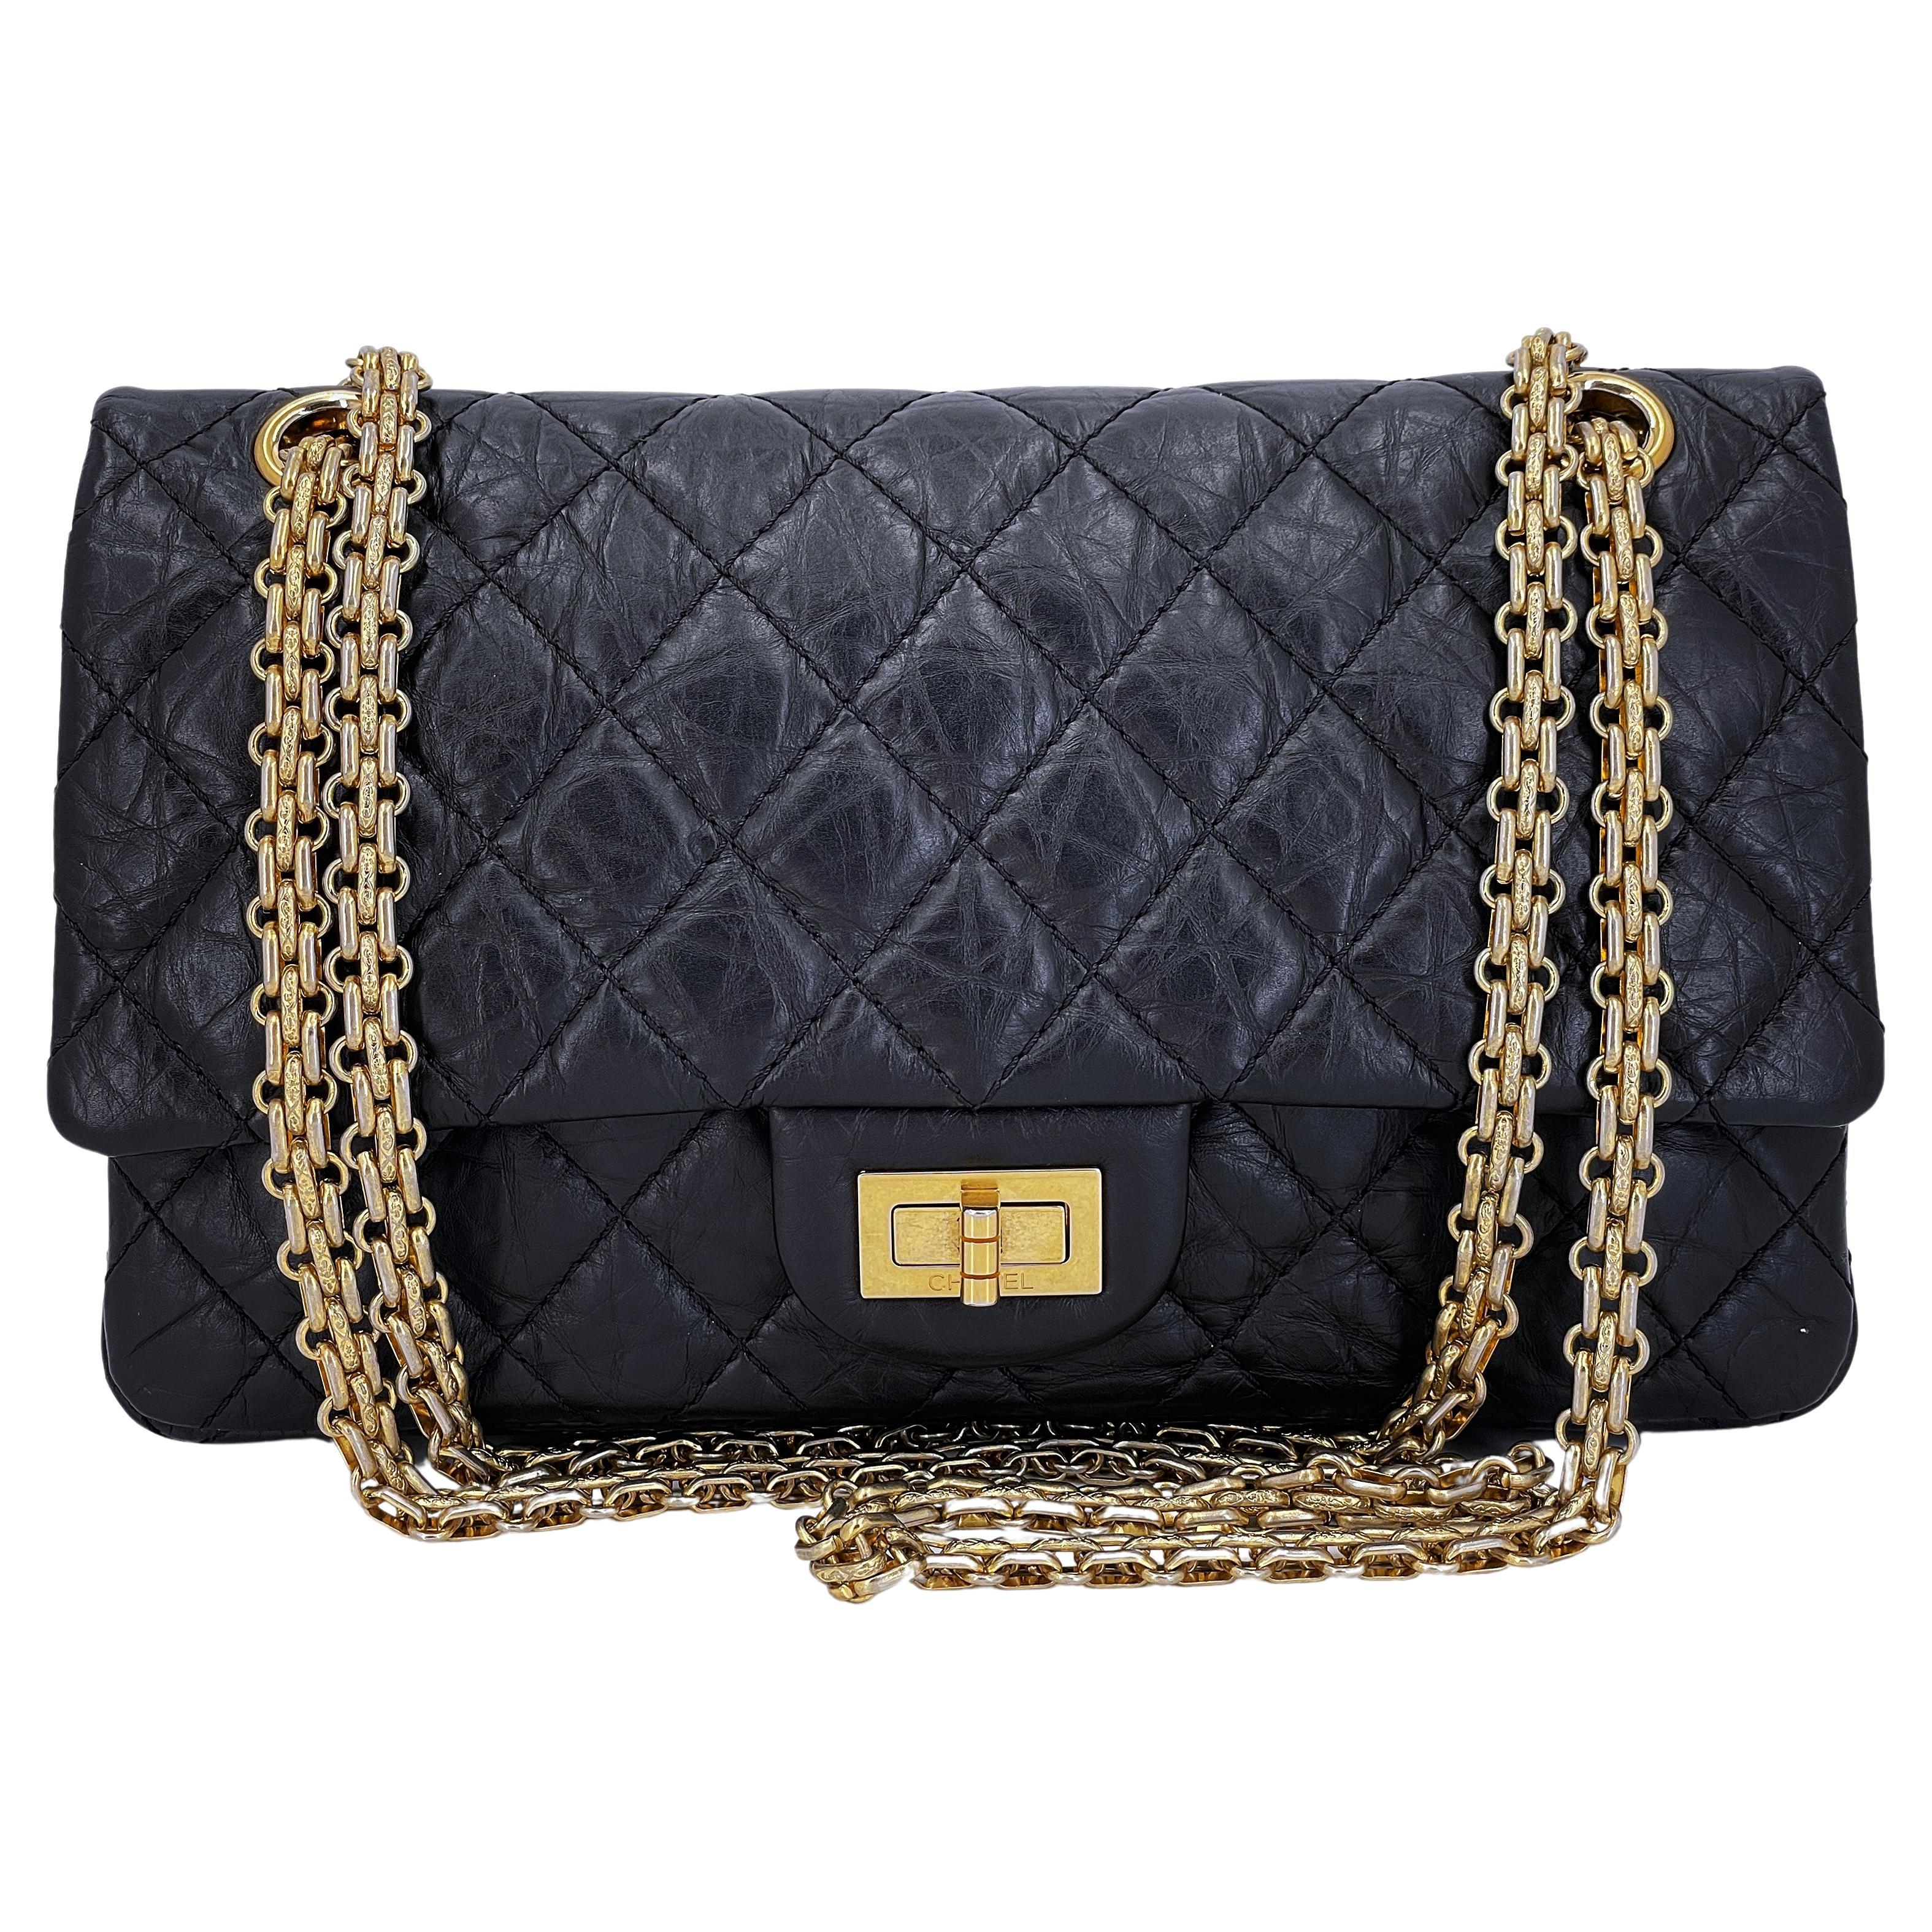 Pristine Chanel Black 225 Reissue Small 2.55 Flap Bag GHW  67274 For Sale